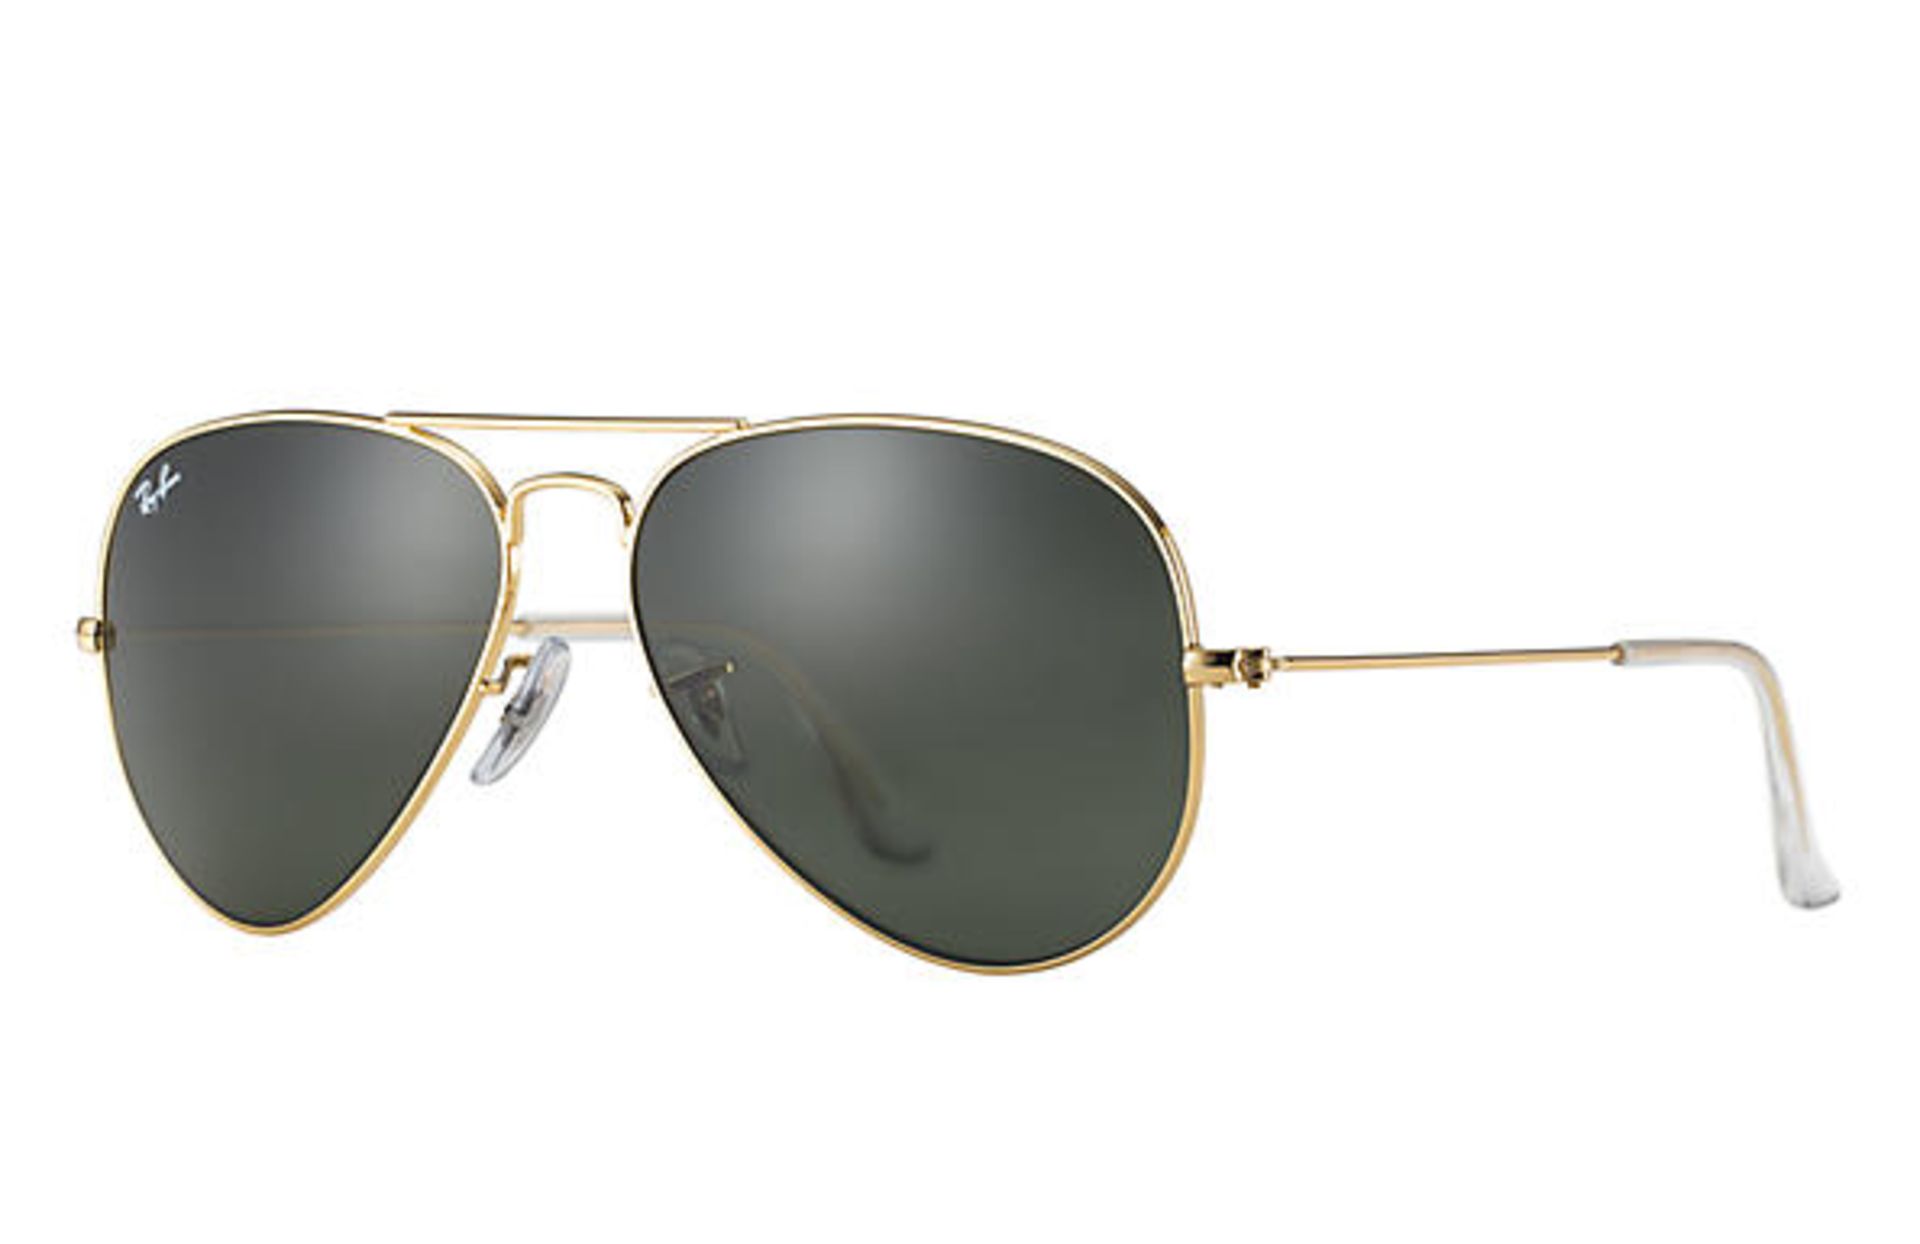 BRAND NEW RAY-BAN AVIATOR - RB3025 L0205 SIZE 58 mm RRP £159.99